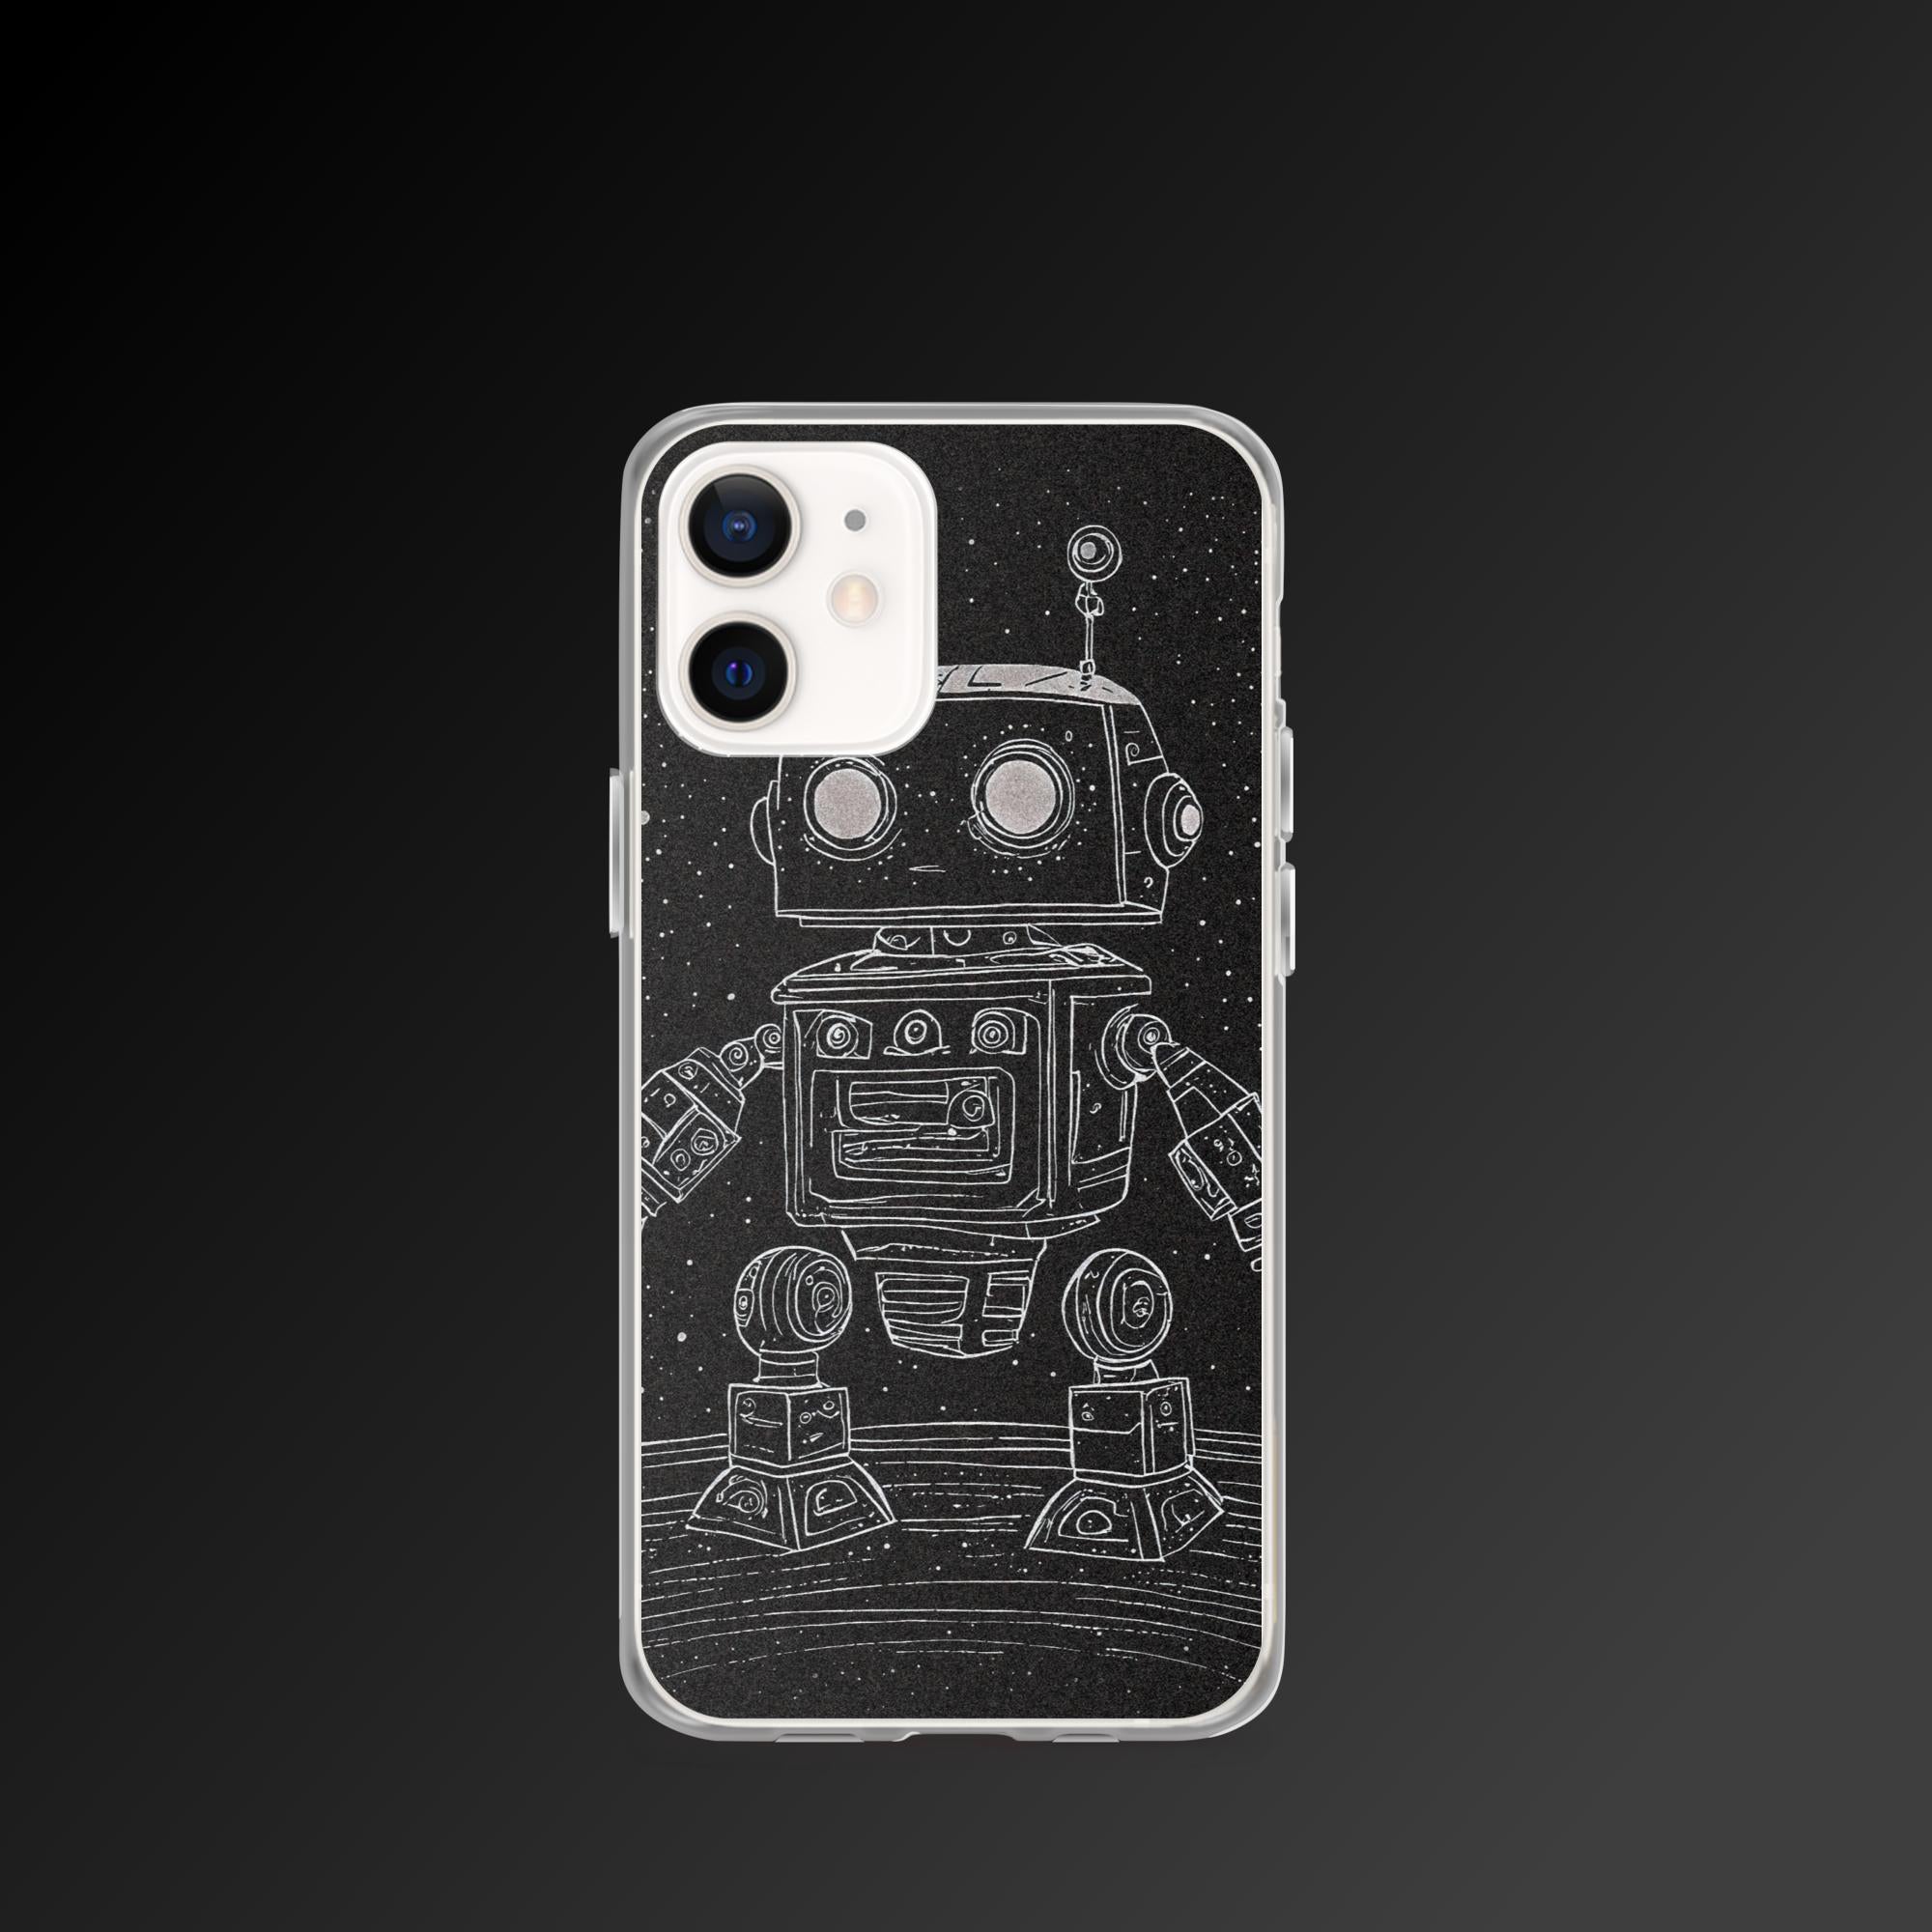 "Grayscale starobotics" clear iphone case - Clear iphone case - Ever colorful